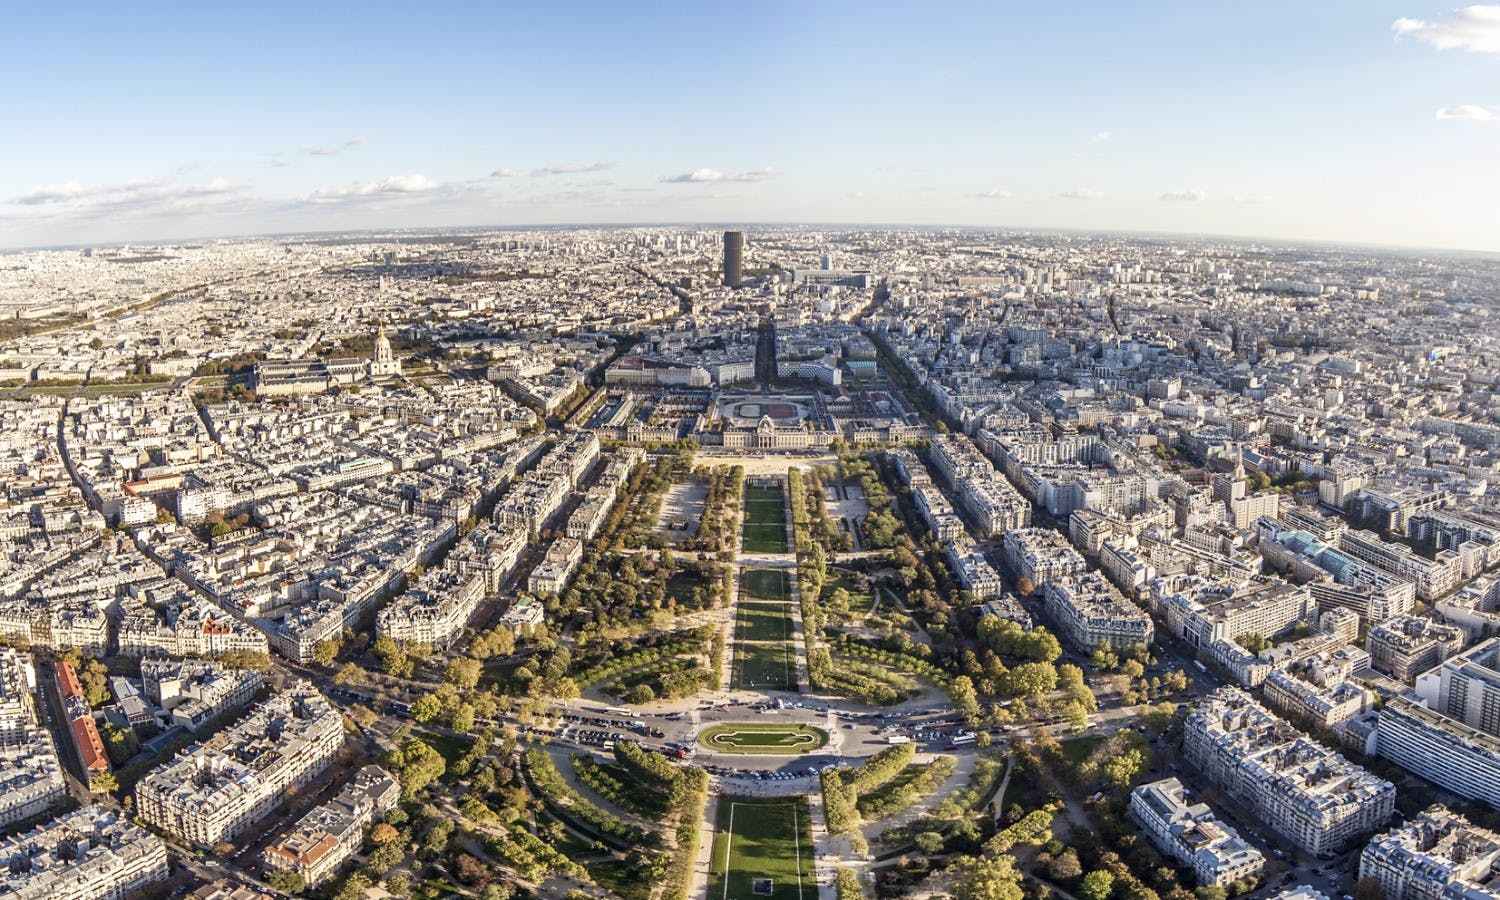 Skip the Line Tickets to the Eiffel Tower with Summit Access and Guided Visit (Day Tour)